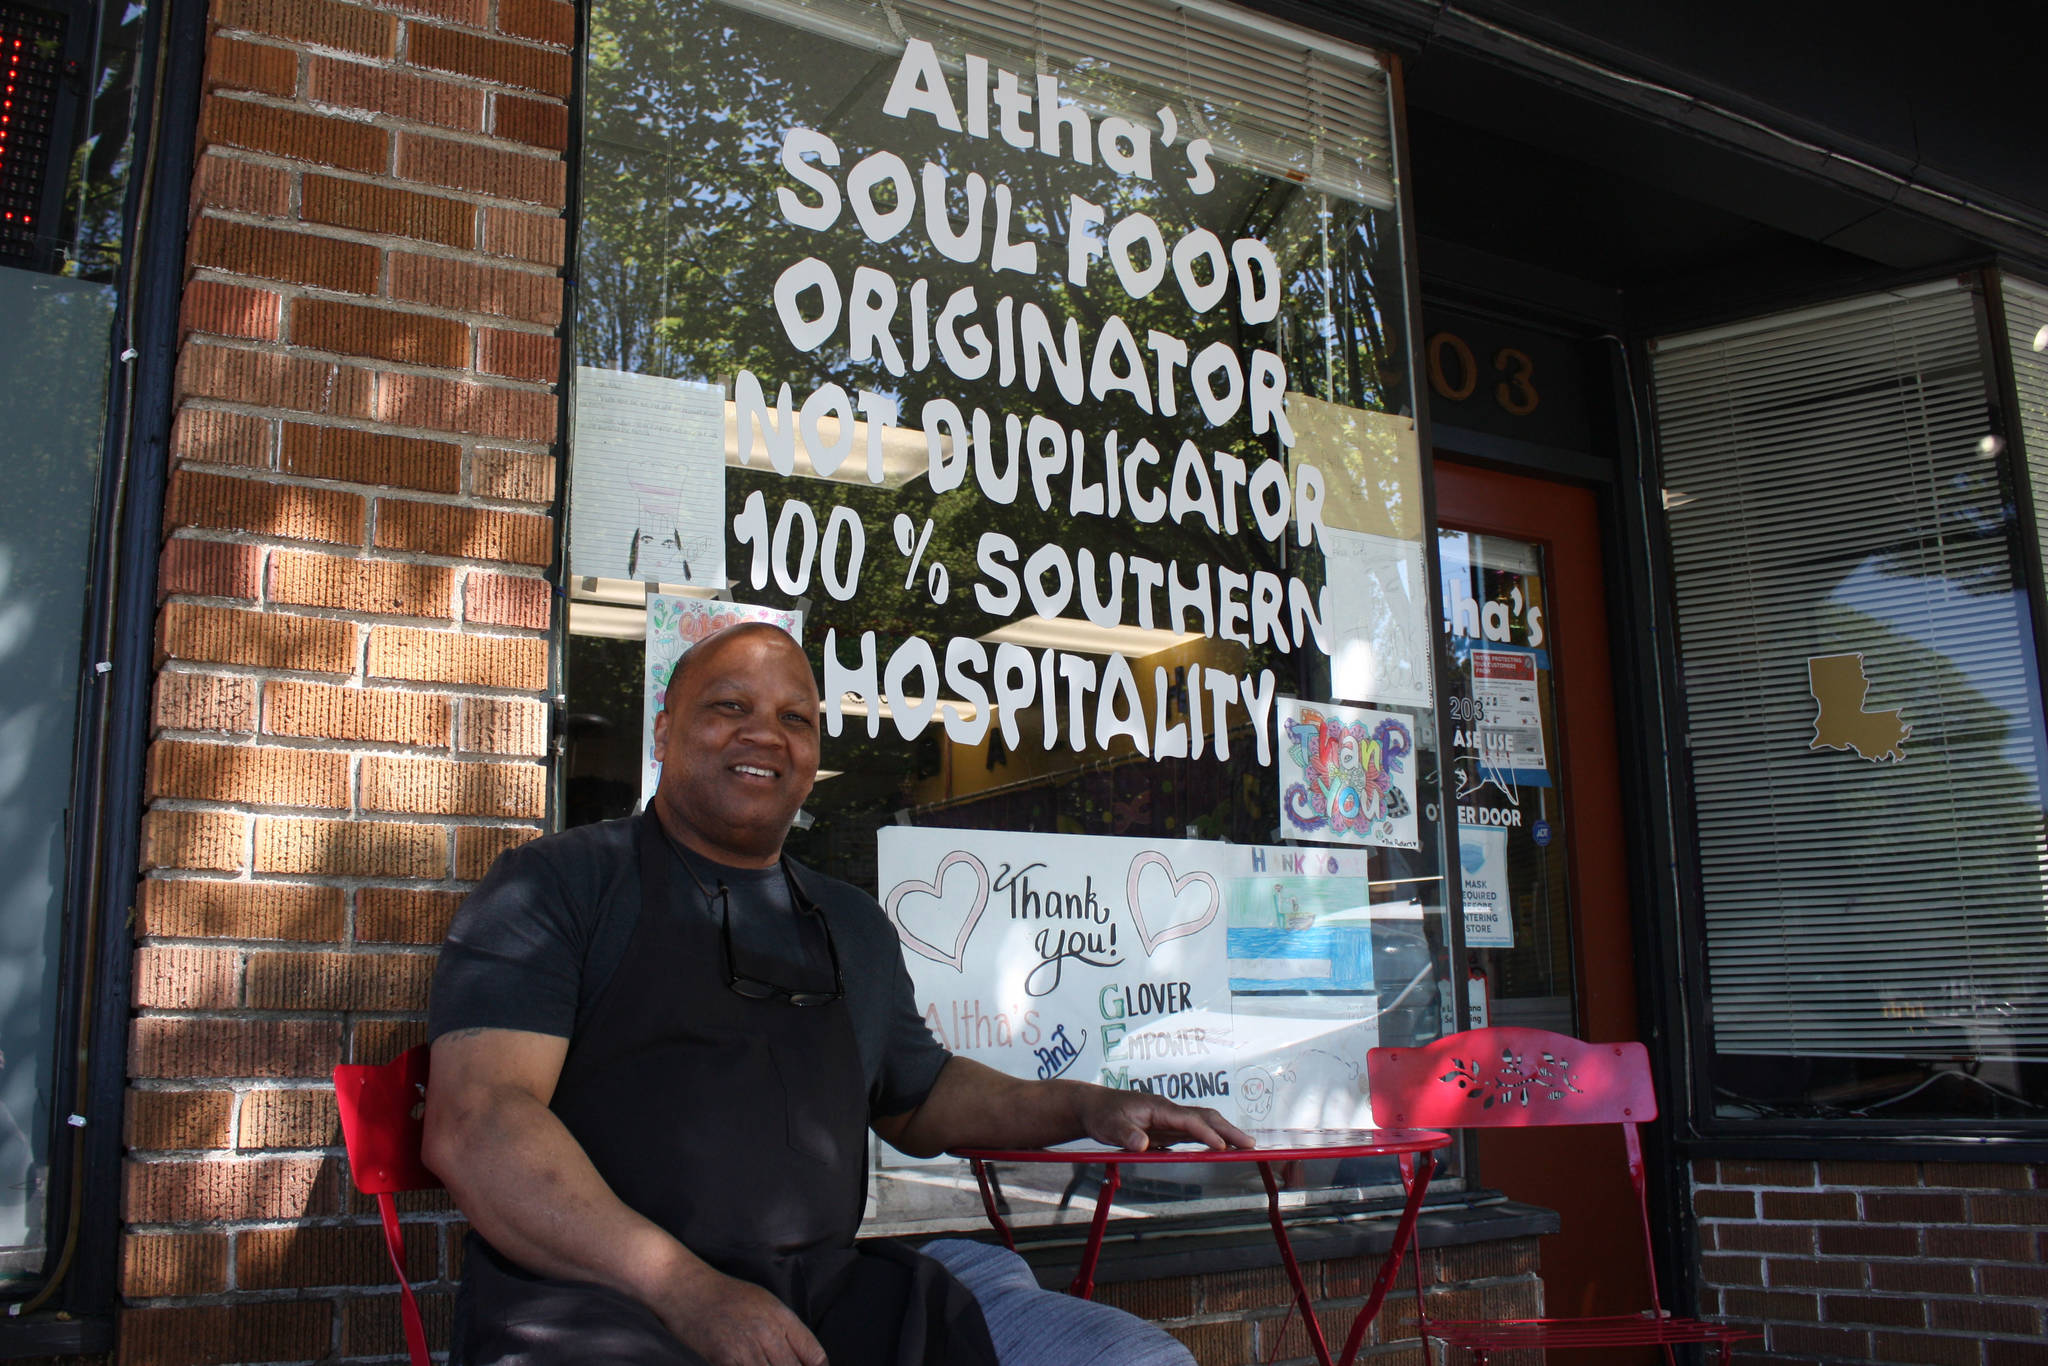 Owner Reginald Robinson sits in front of his deli (photo credit: Cameron Sheppard)